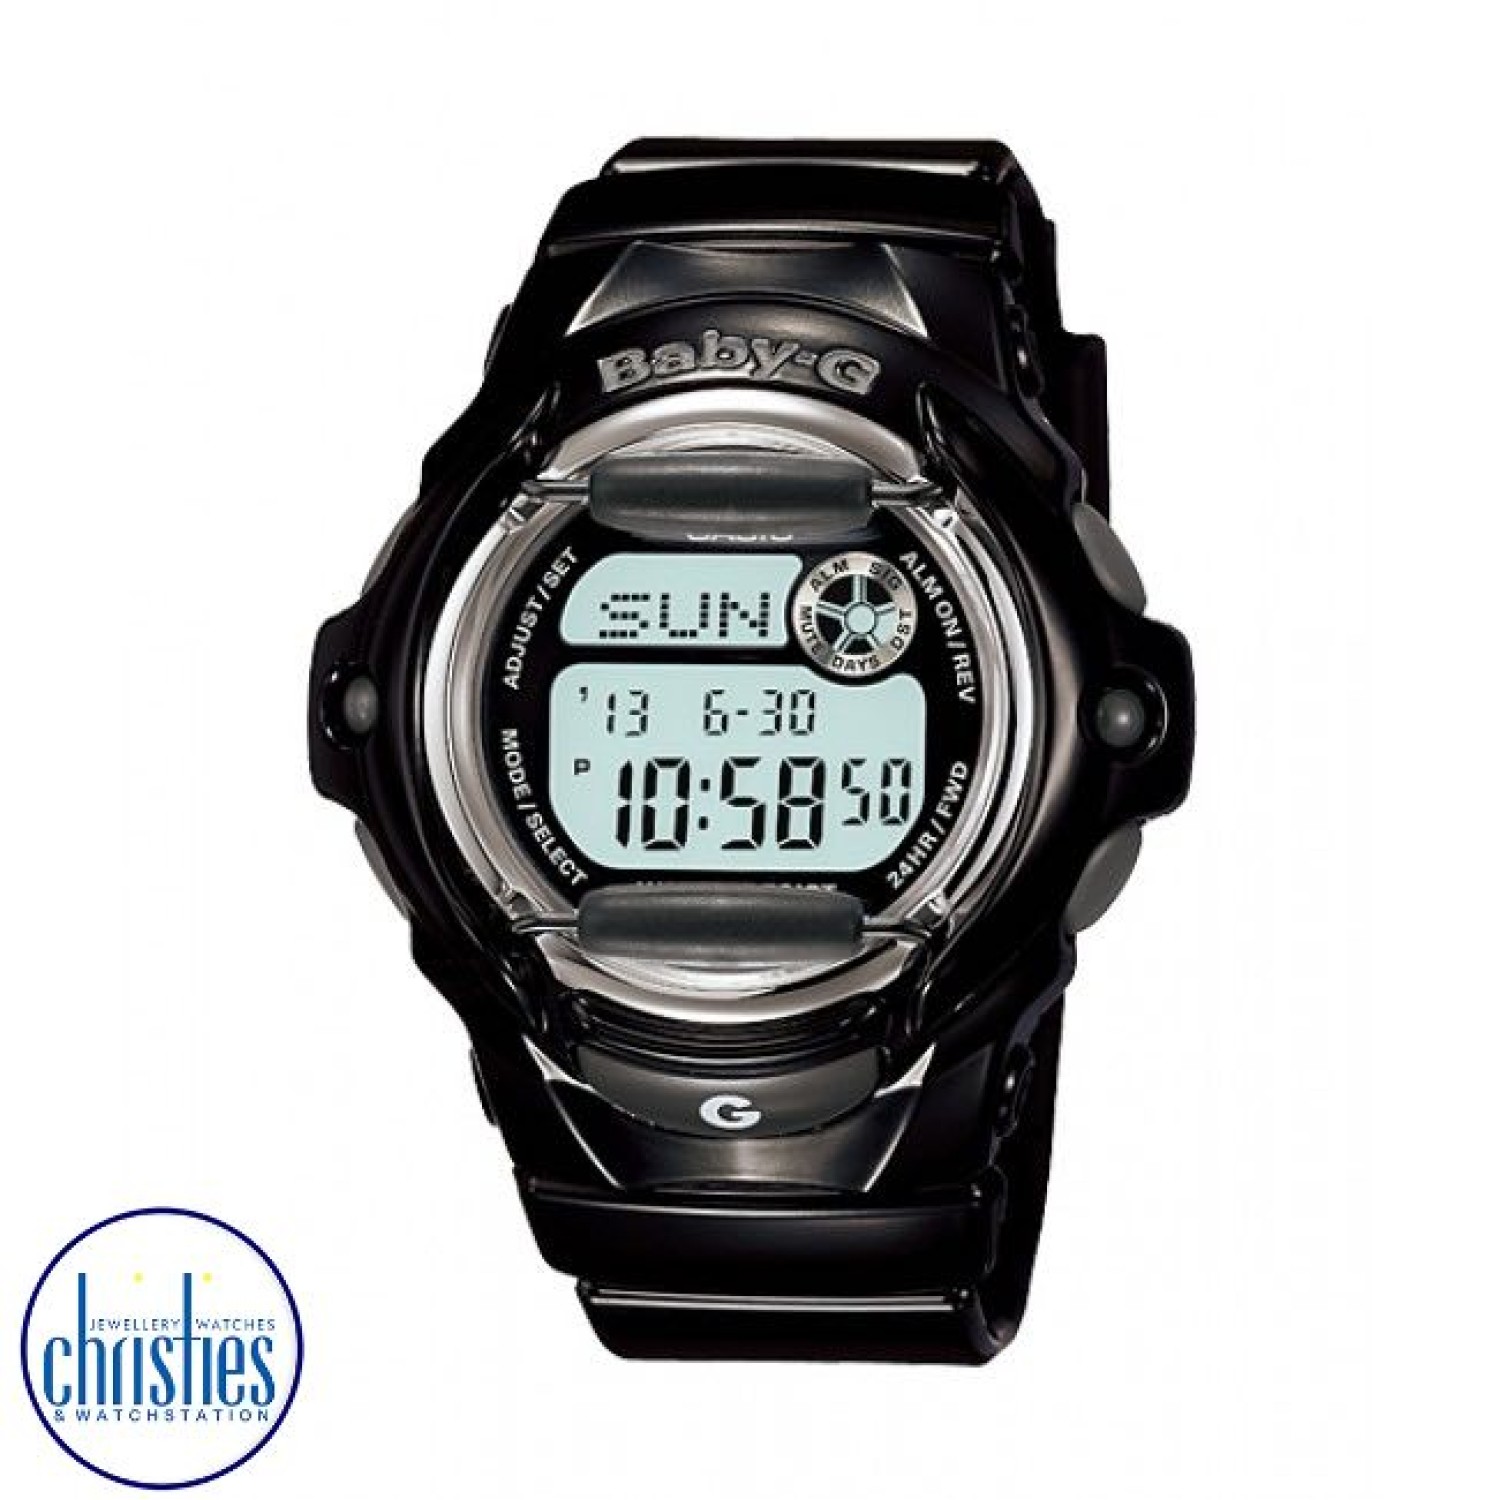 BG169R-1D Casio Baby-G Watch. Baby-G Jelly watches are shock resistant tough, but pretty. They come in great, soft colours and have all the signature G-Shock shock and water-resistant features. Featuring a Black band colour and Neutral face colour. @chris